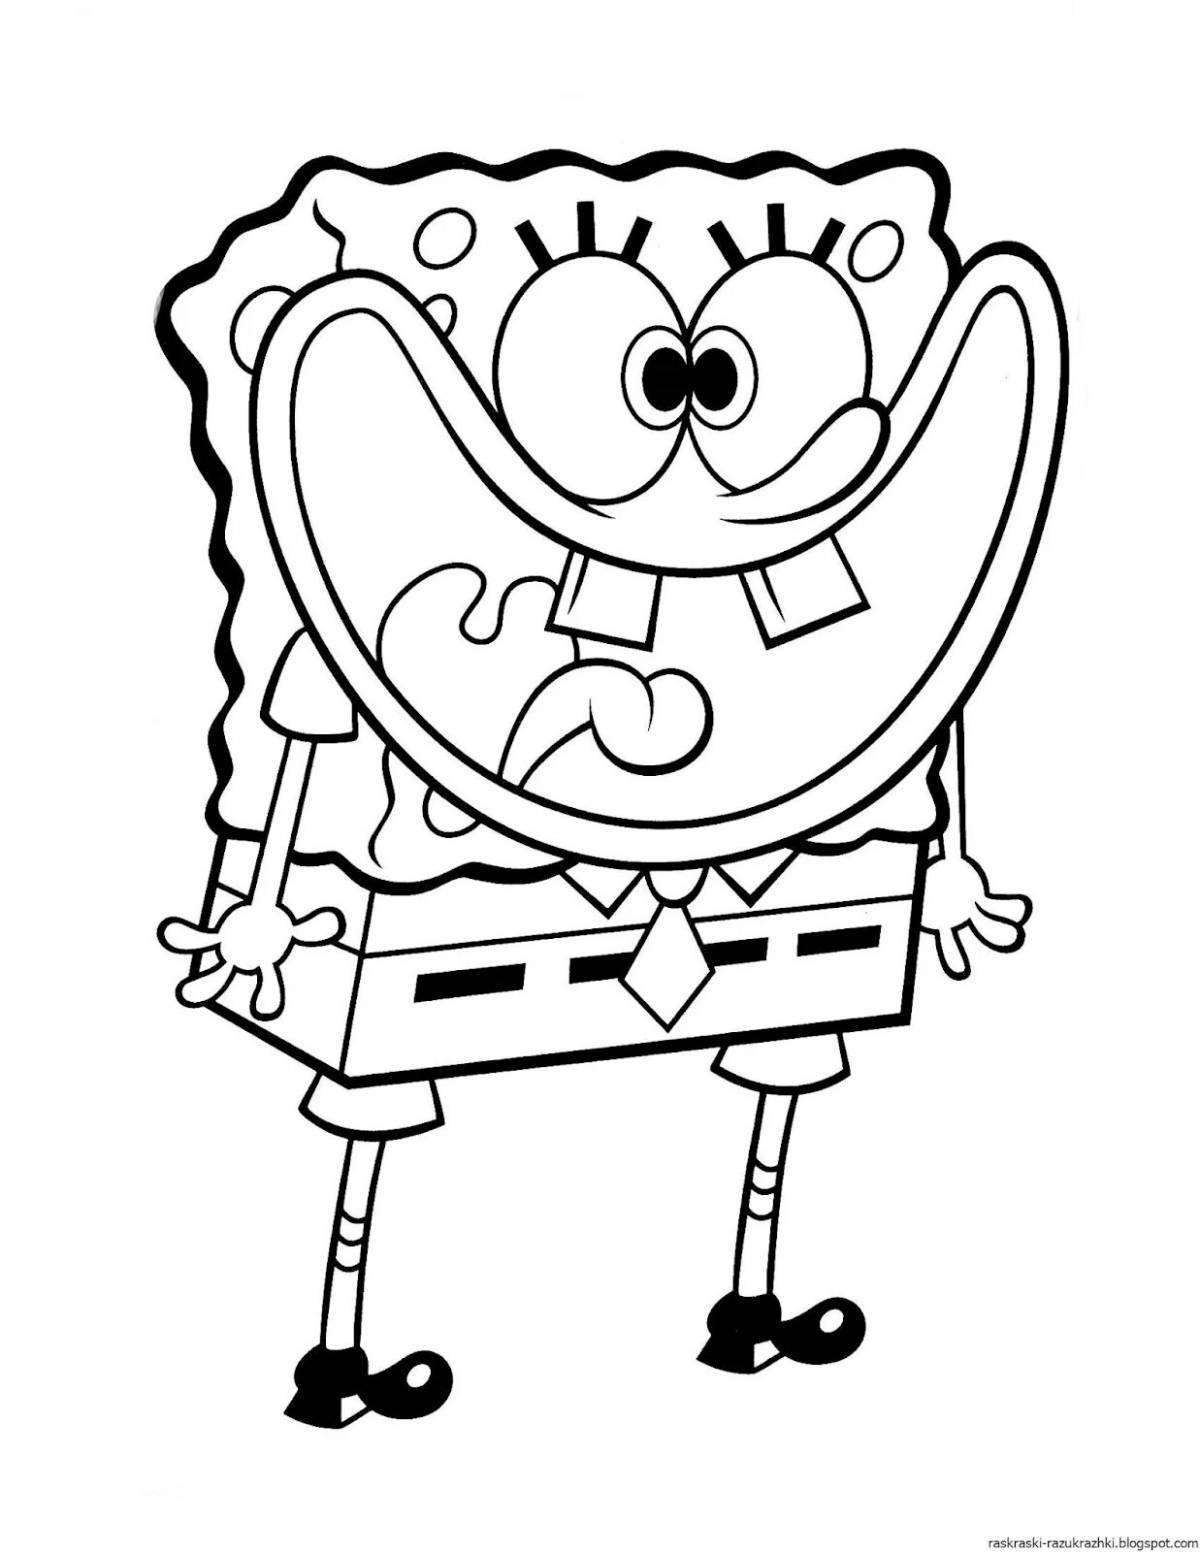 Colorful spongebob coloring book with print